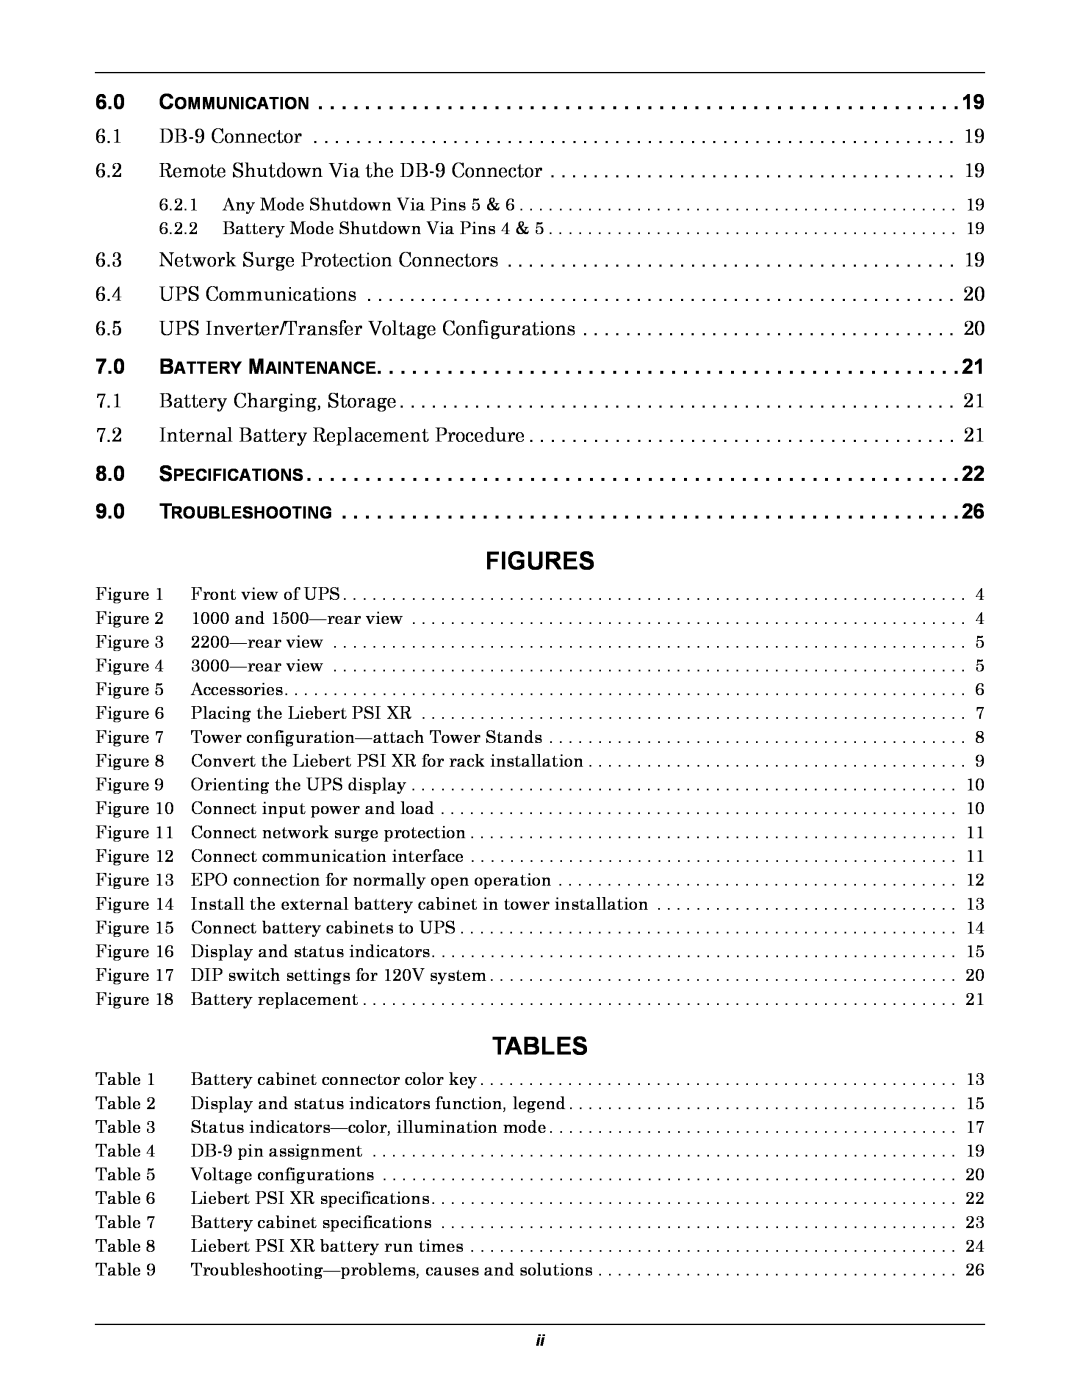 Emerson 3000, 1500, 1000, 2200 user manual Figures, Tables 